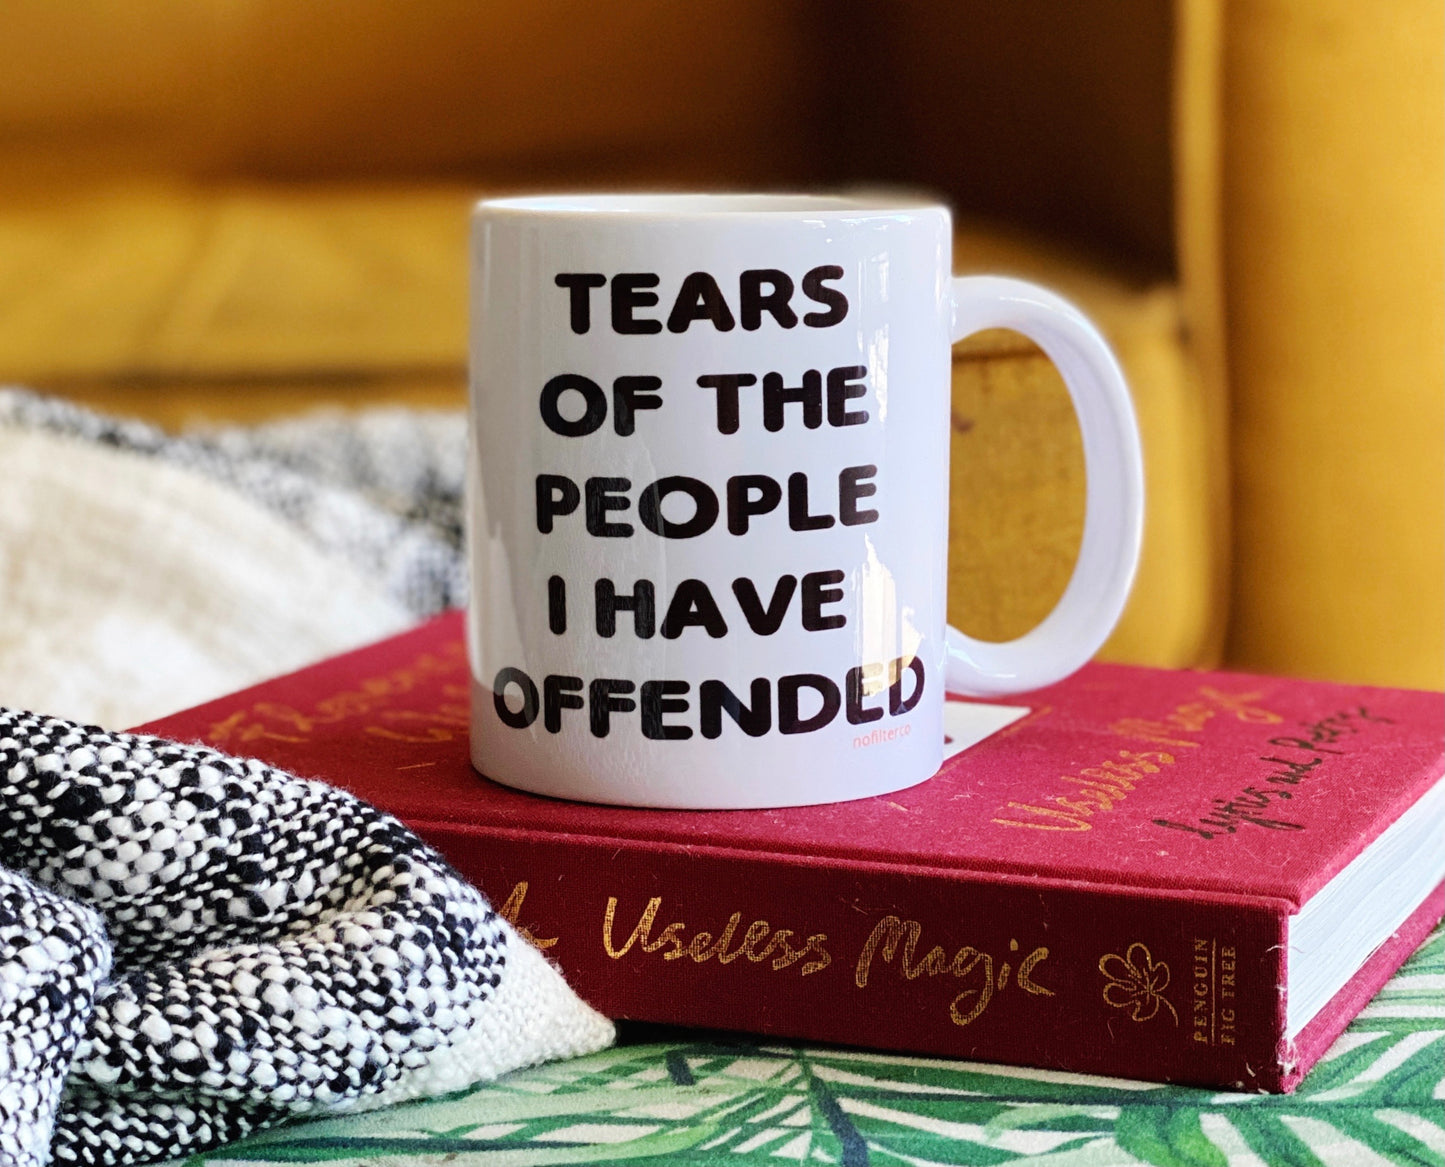 Tears of the offended